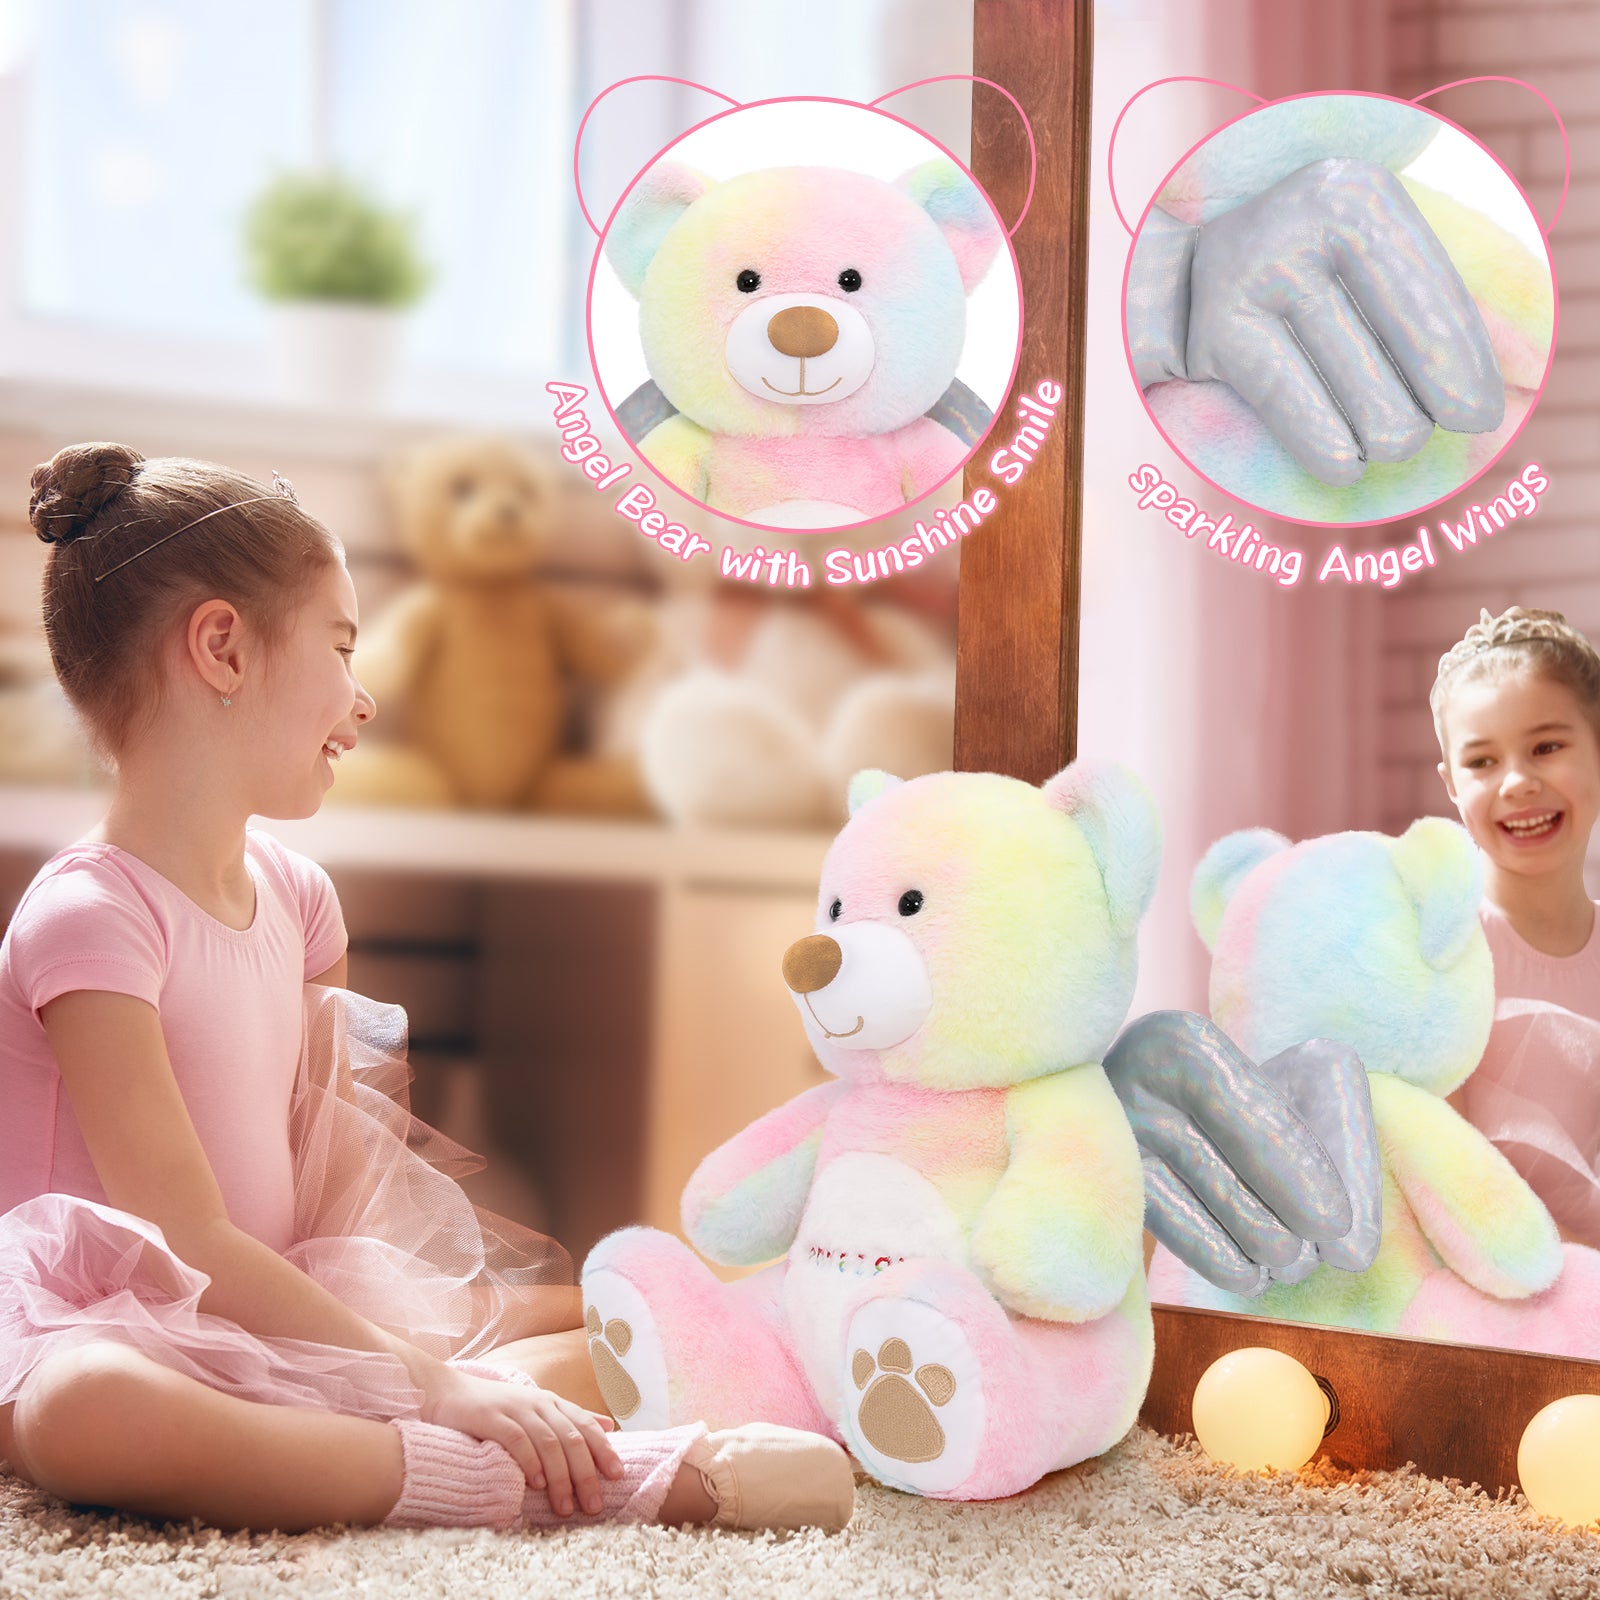 Angel Teddy Bear with Wings, 15.4 Inches